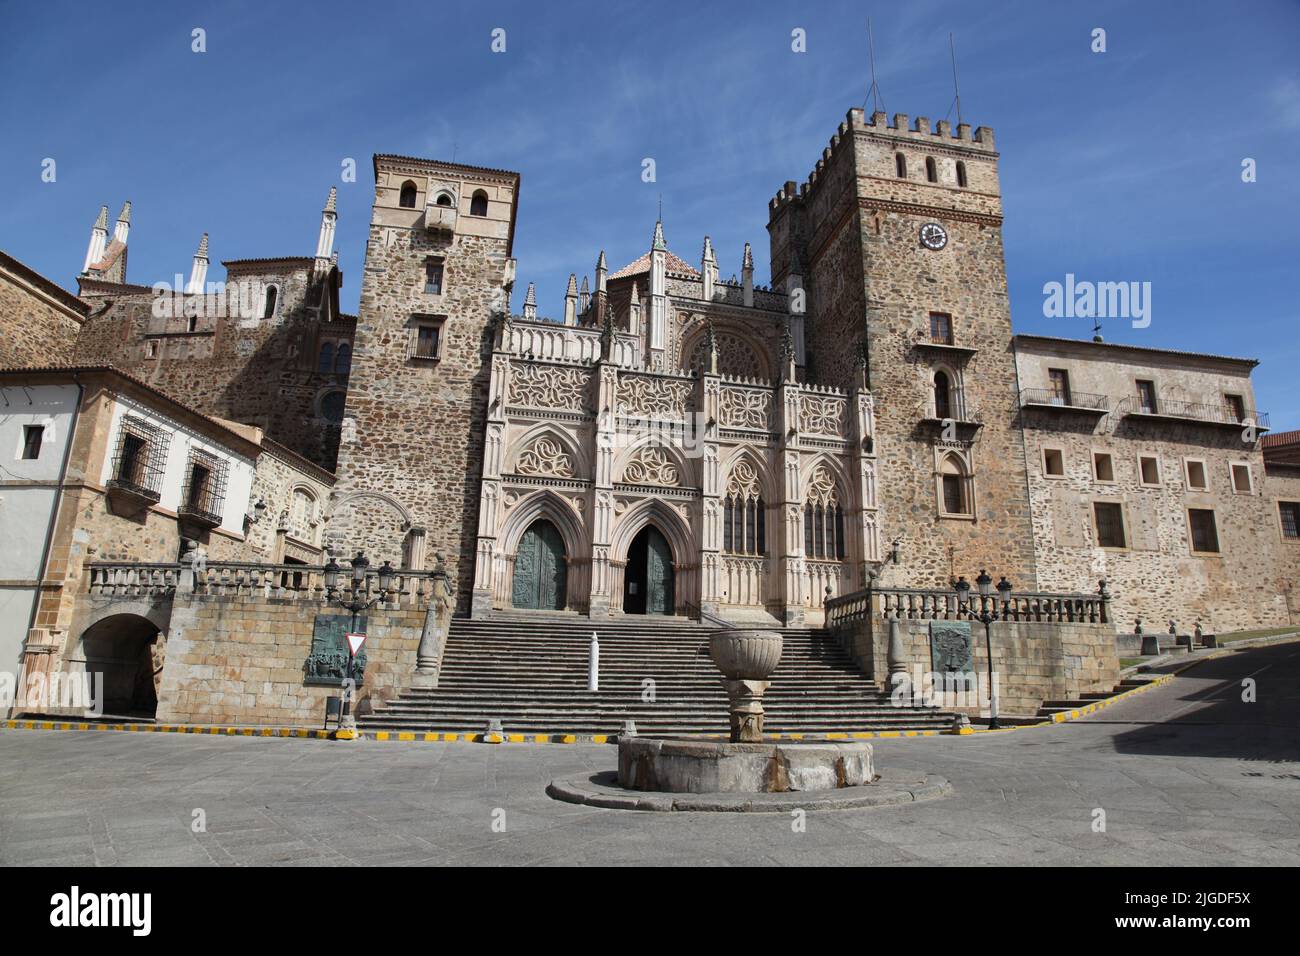 The historic "Real Monasterio De Santa Maria" in Guadalupe Extremedura Spain. This monastery is a UNESCO world heritage site and dates back to 1340. Stock Photo